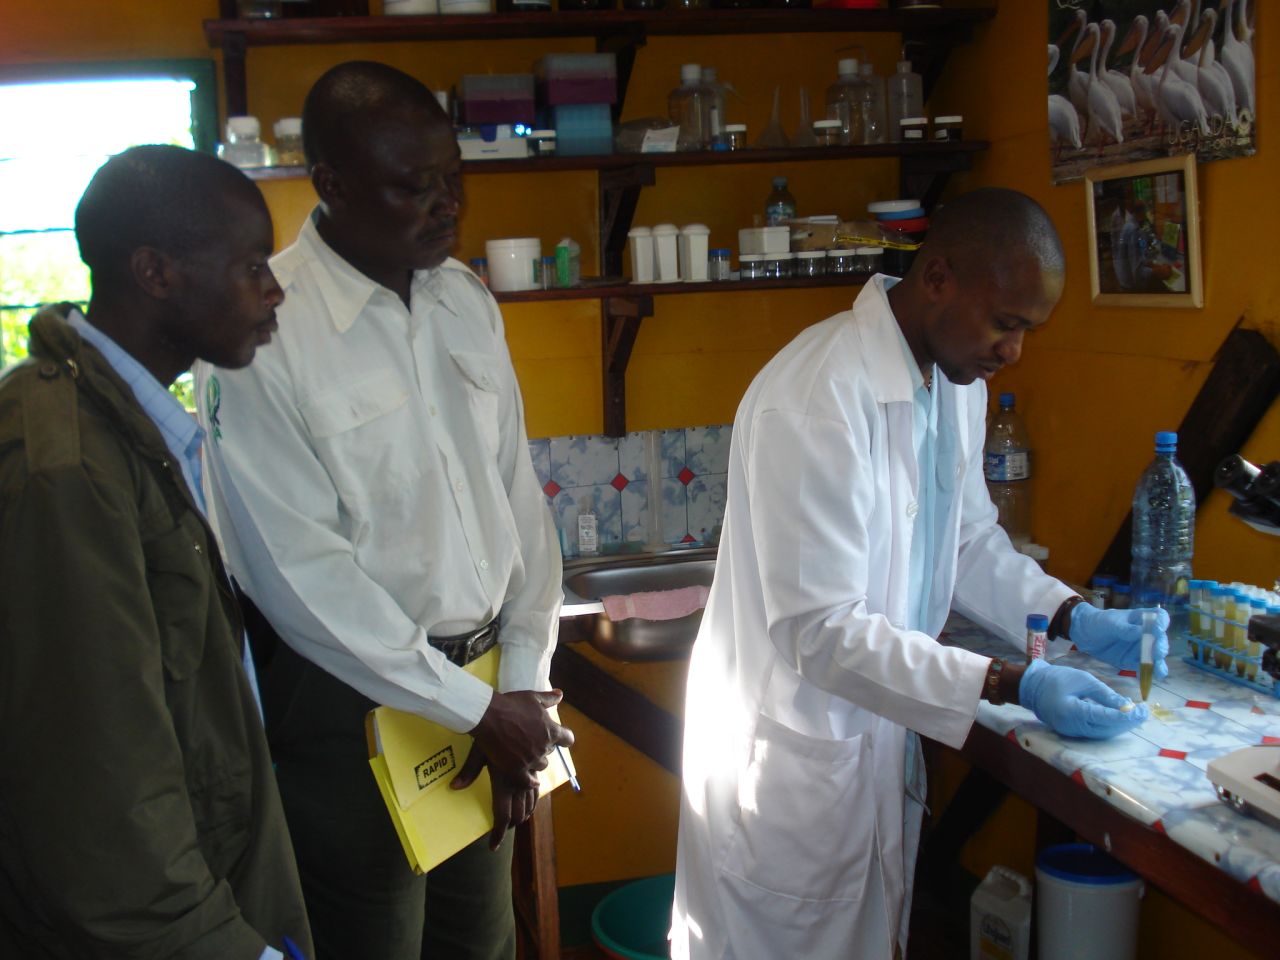 Part of the work conducted at the CTPH involves training wildlife health monitoring. Trained rangers, trackers and volunteers collect fecal samples which are then analyzed at the Gorilla Research Clinic for disease outbreaks and other medical ailments the mountain gorillas might face. 